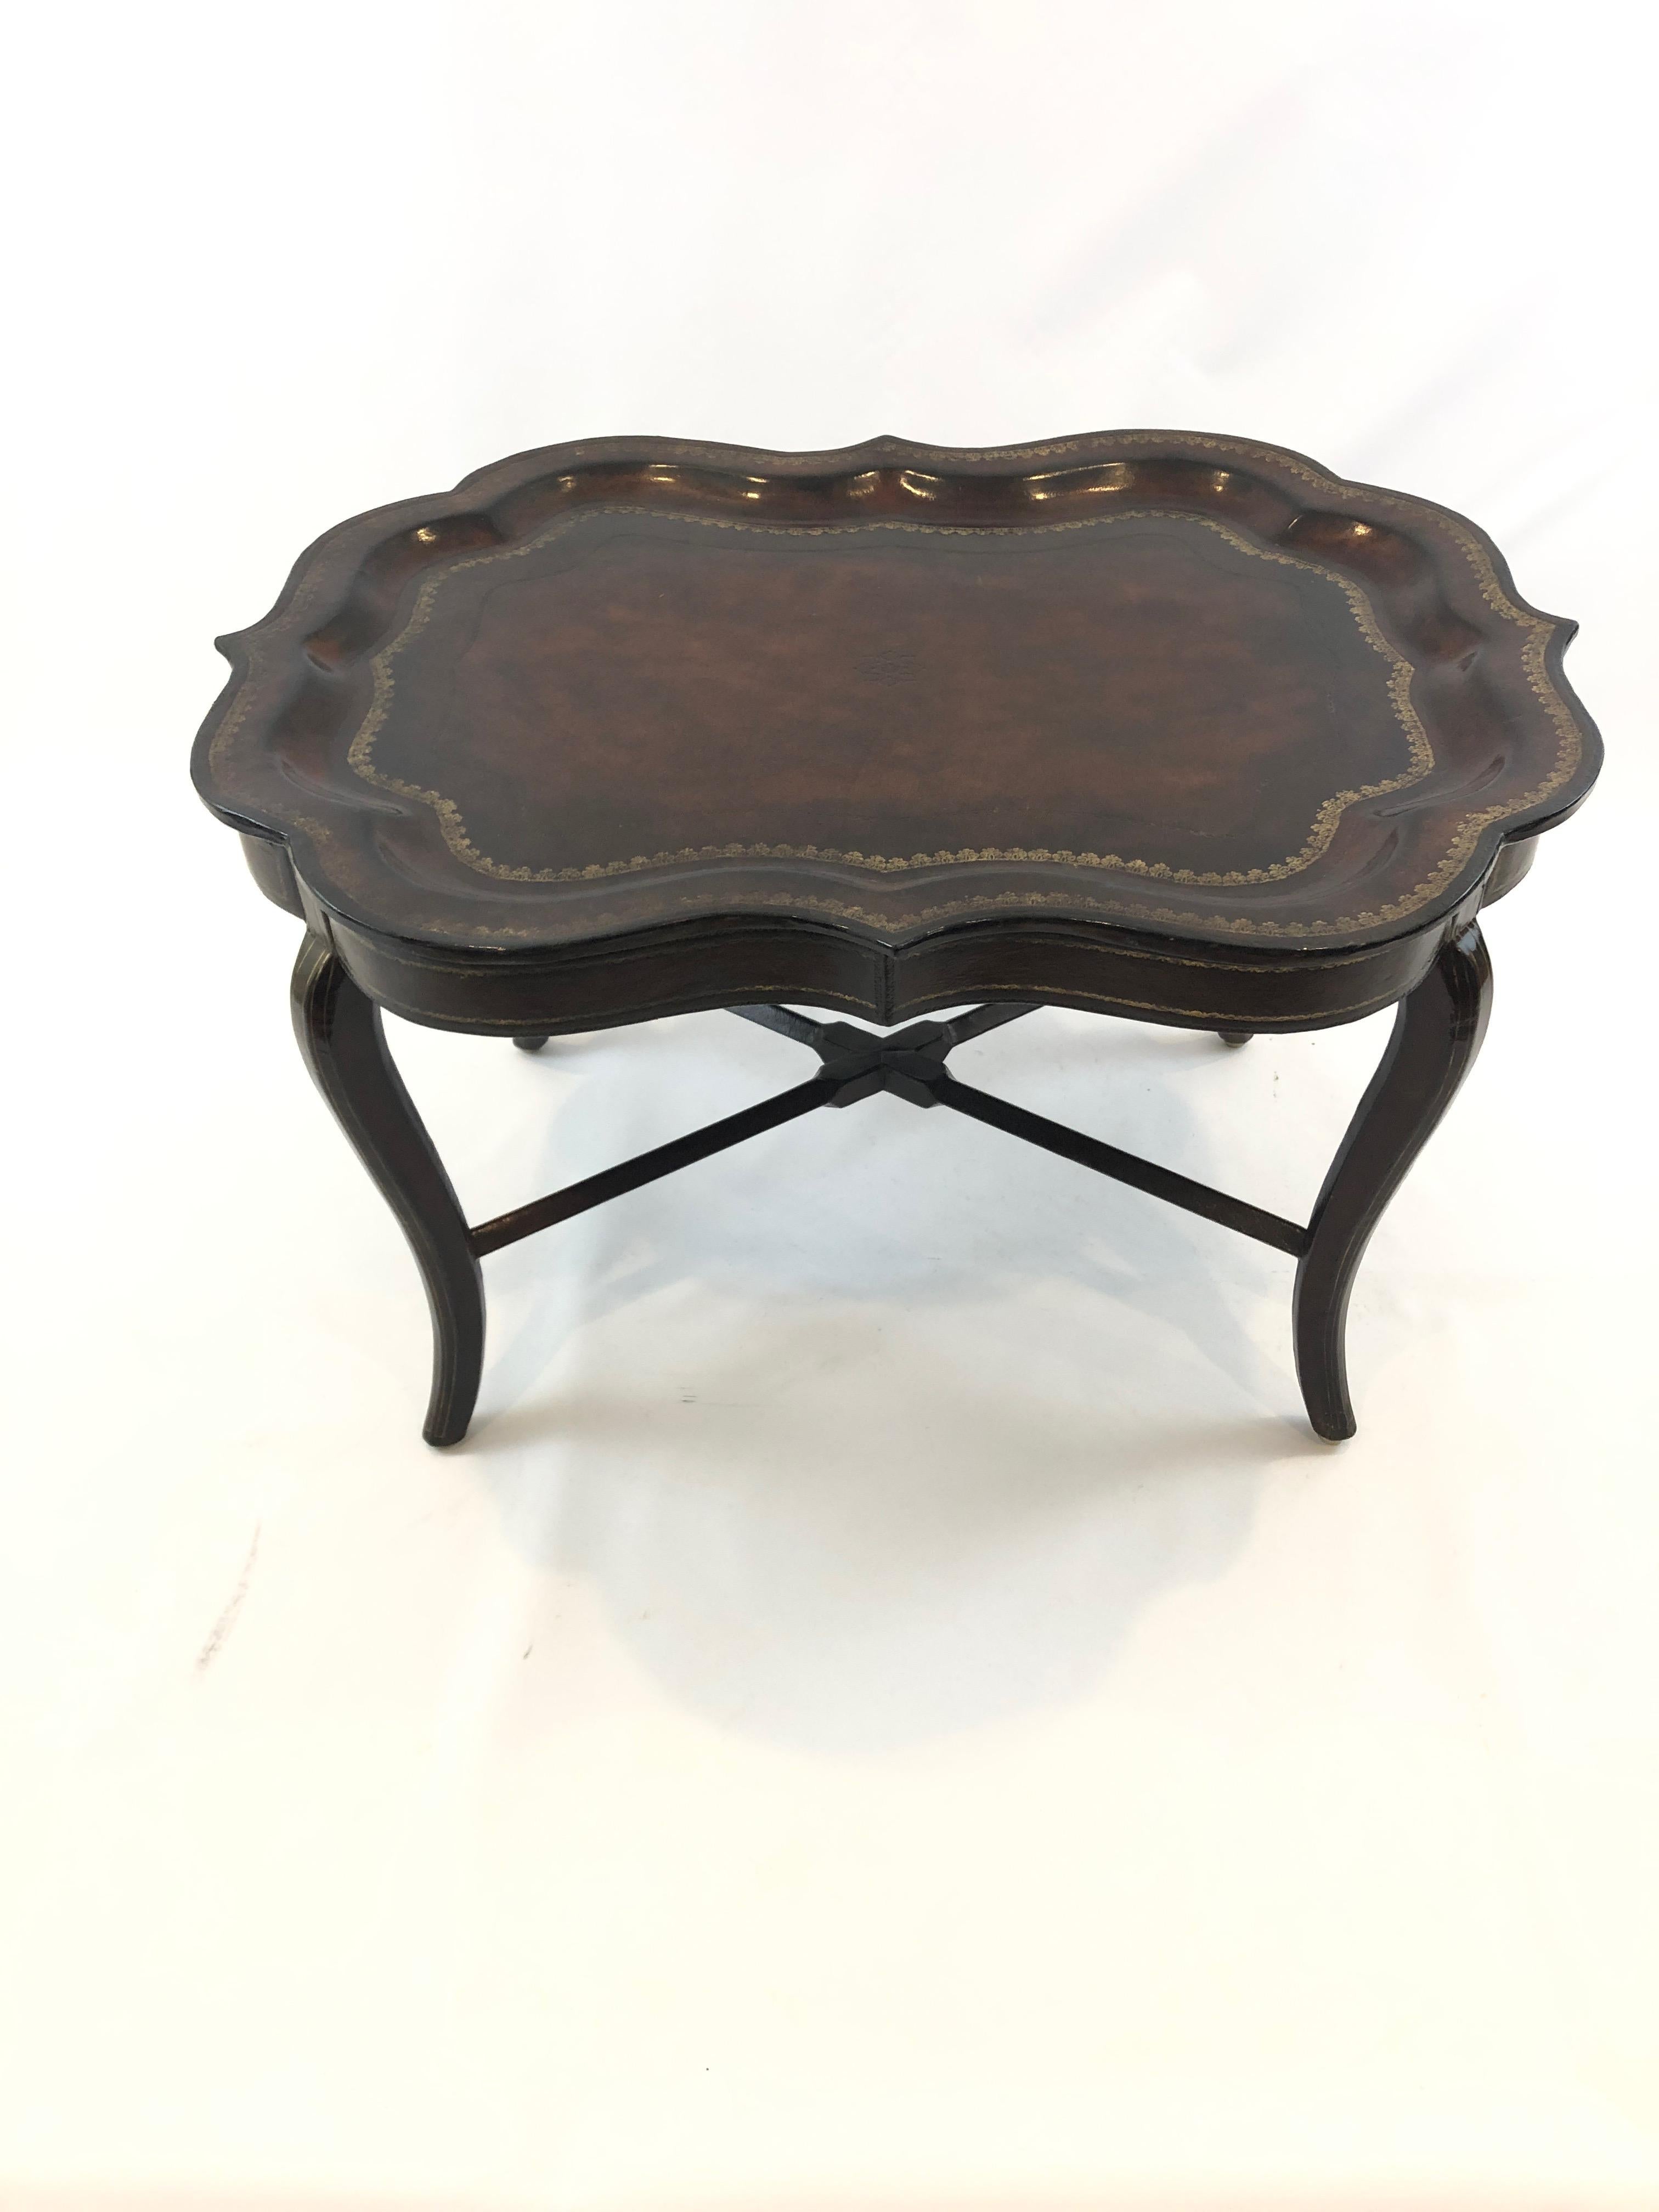 Superb embossed rich brown tooled leather tray coffee table having a scalloped tray removable top with gilded embellishments as well as stunning leather wrapped base.